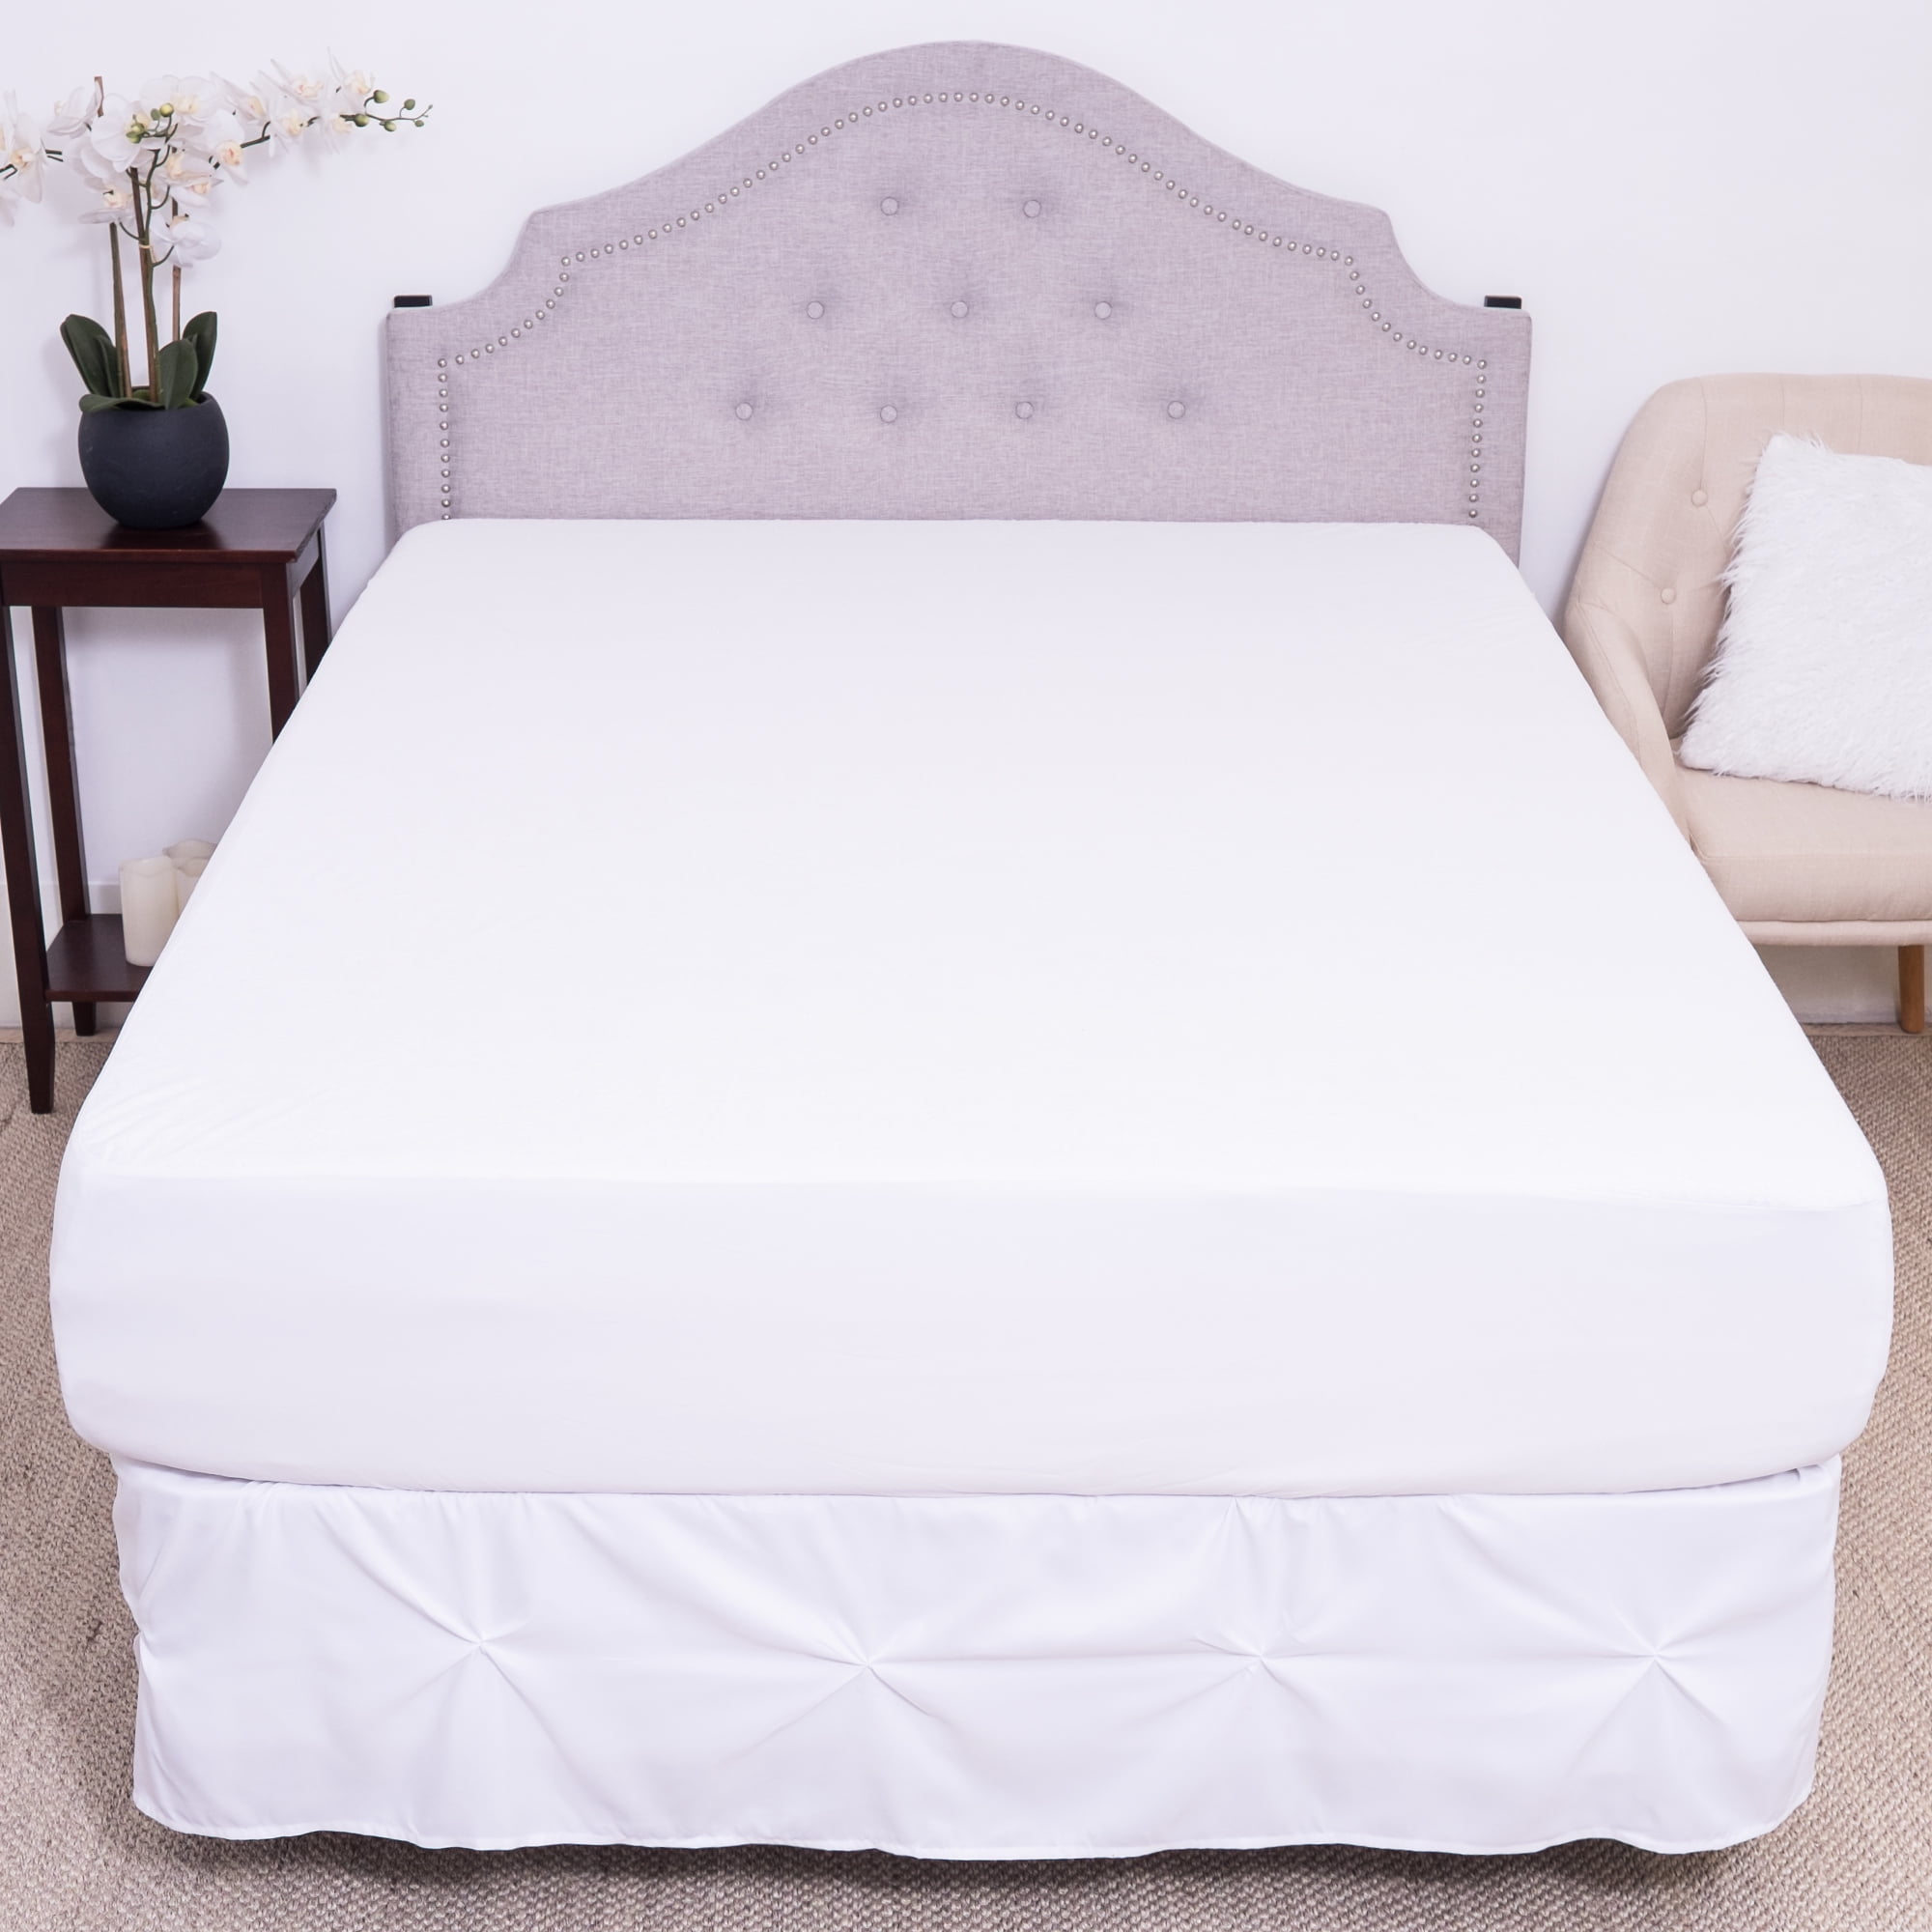 SINGLE SIZE BED WATERPROOF TERRY TOWEL Mattress Protector Fitted Sheet Bed Cover 